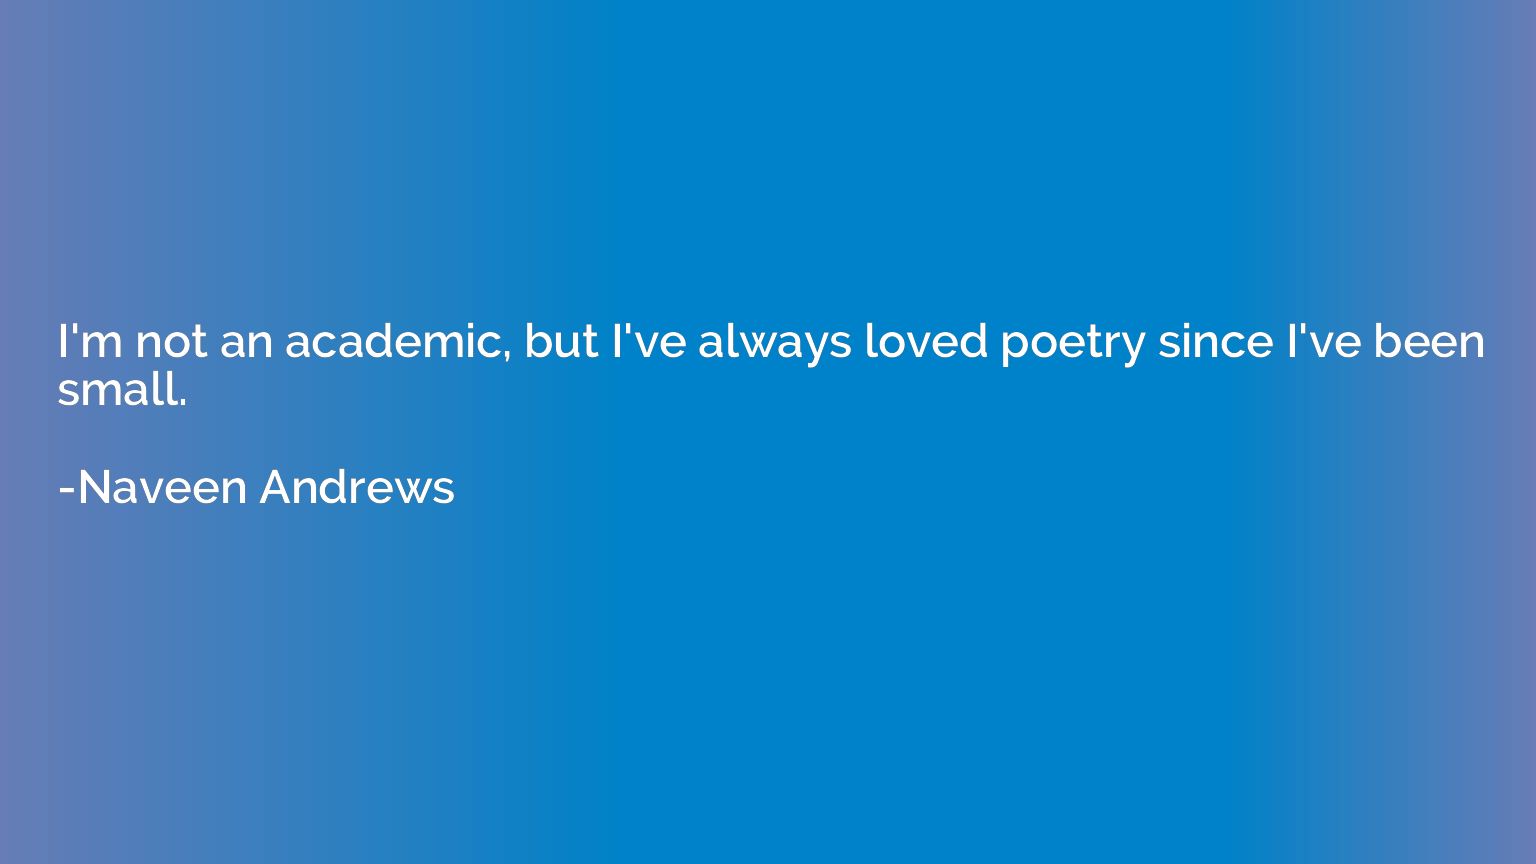 I'm not an academic, but I've always loved poetry since I've